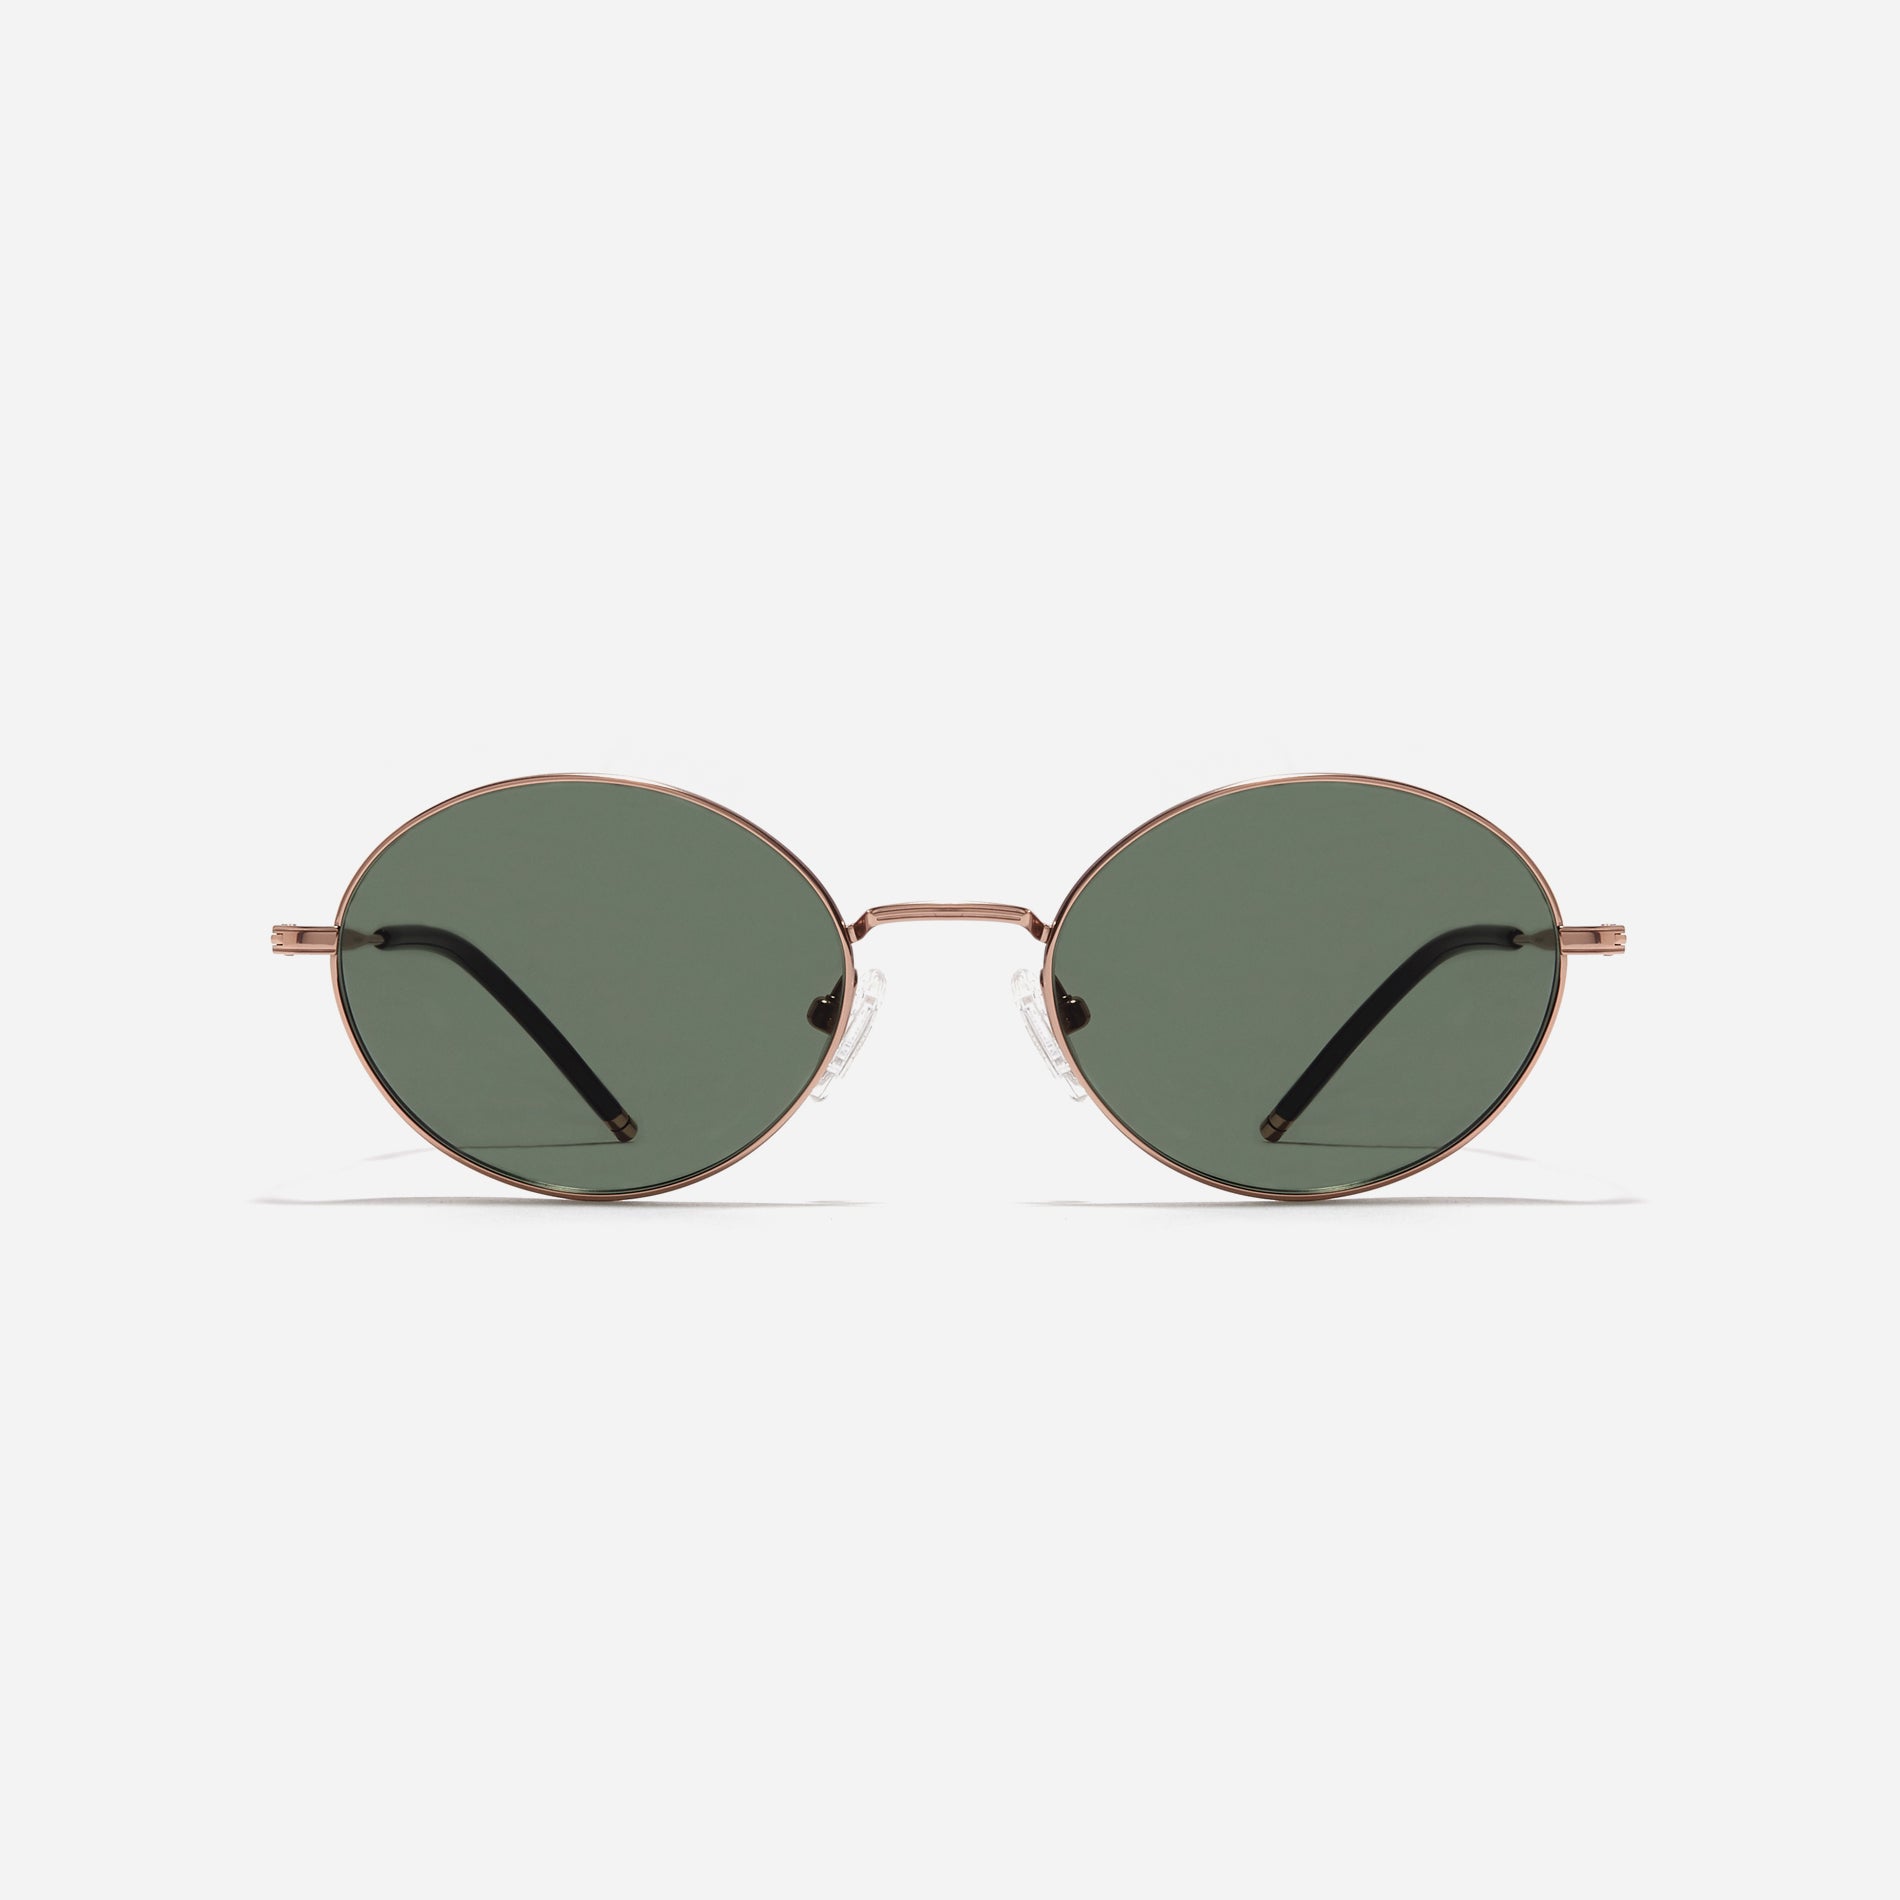 Tinted sunglasses with an oval frame crafted entirely from titanium.